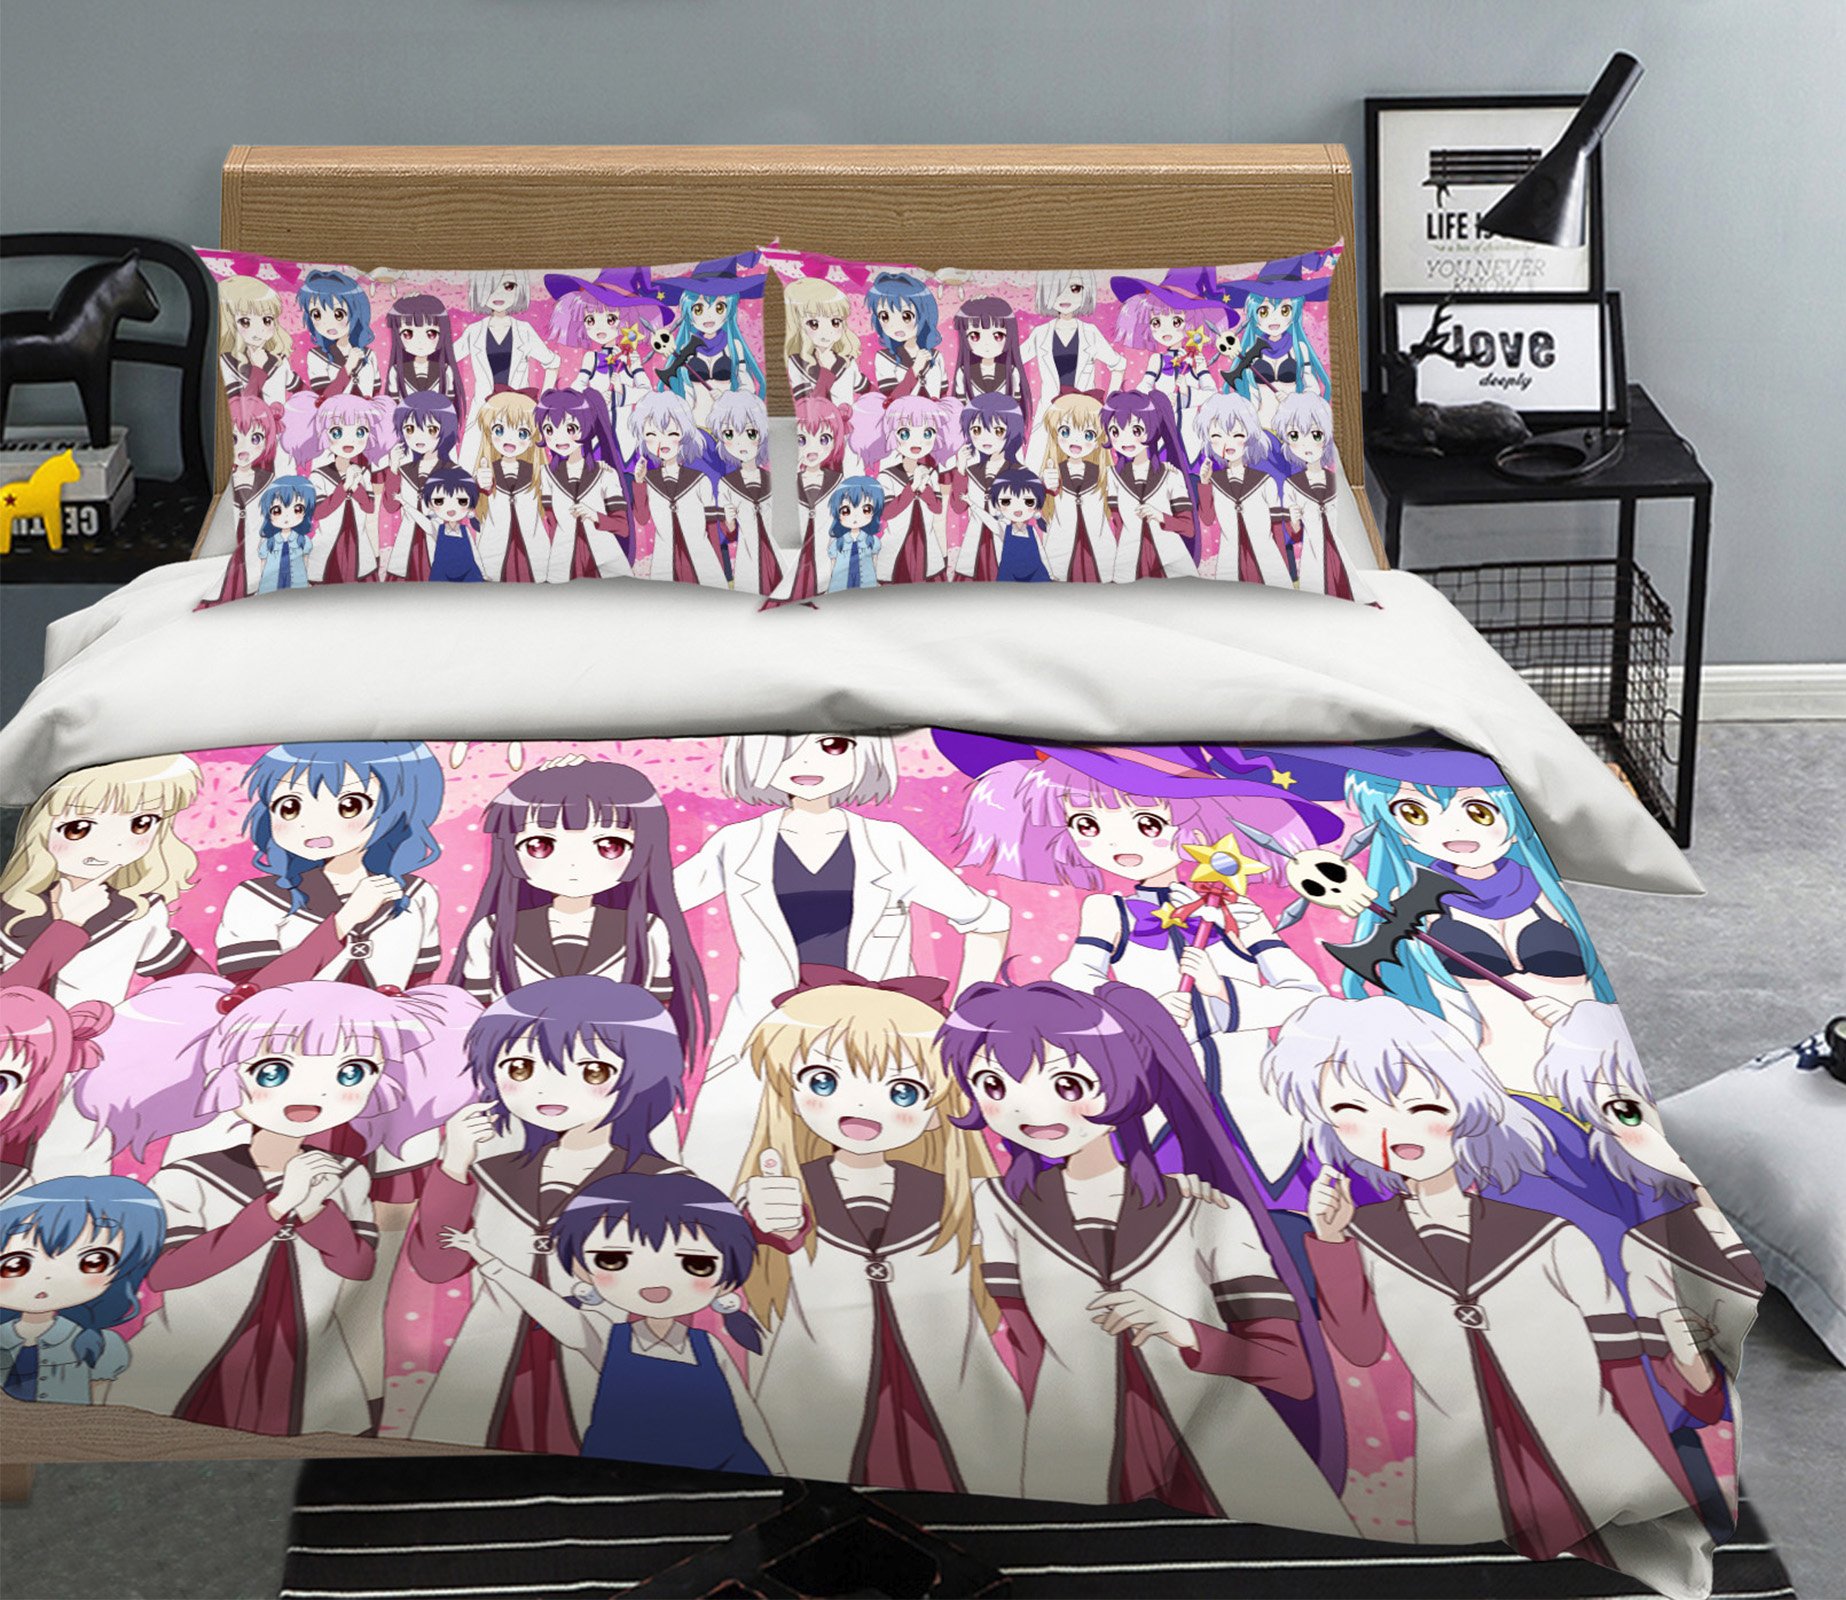 Details about   Toaru Kagaku no Railgun S Bedspread Bed Cover Coverlet Quilt Cover Japan Anime 